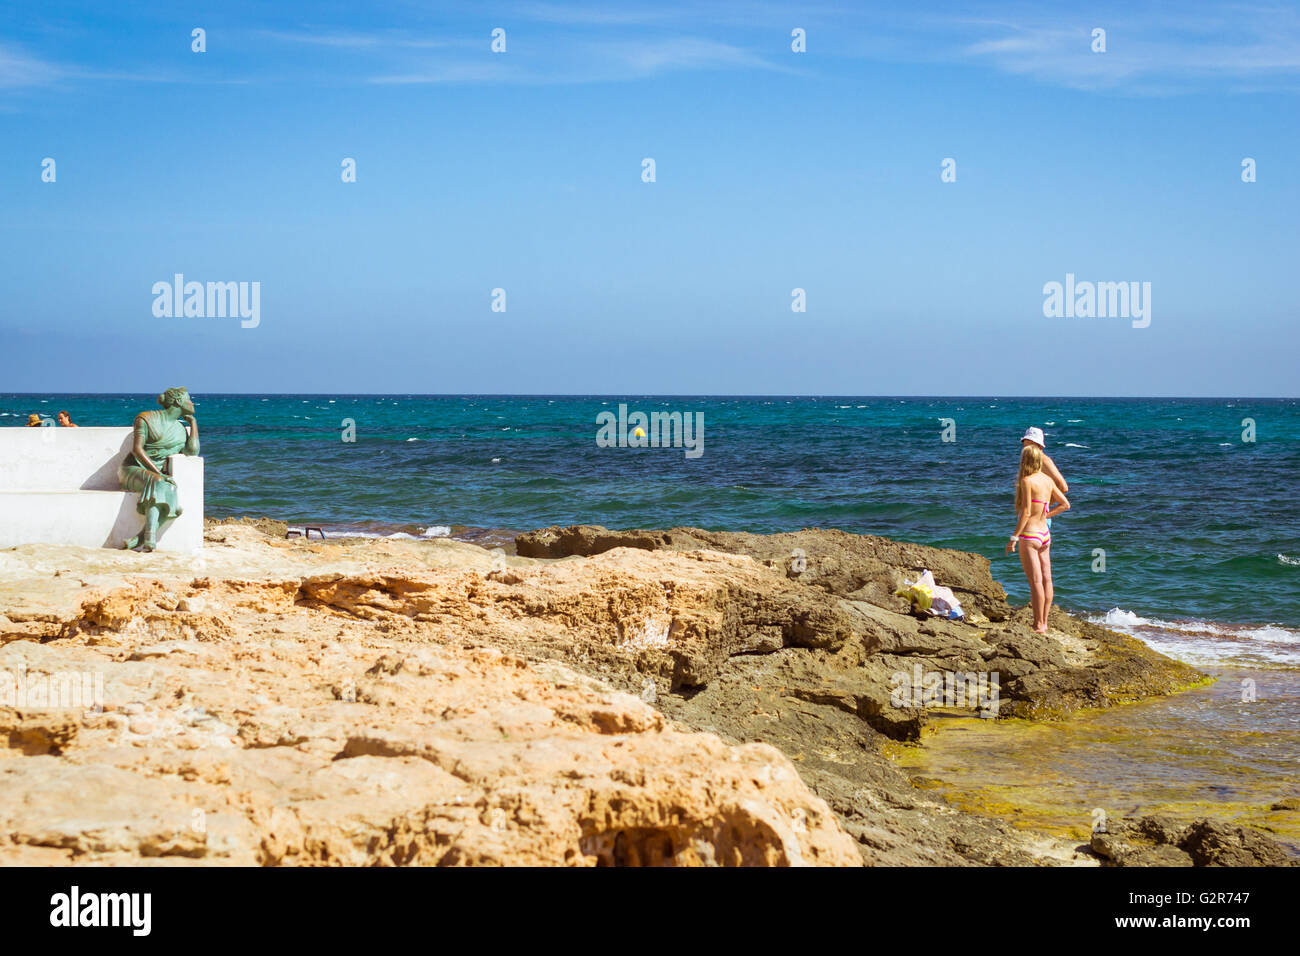 TORREVIEJA, SPAIN - SEPTEMBER 13, 2014: Bronze monument to sailor's wife, Sunny Mediterranean beach, Tourists relax in water Stock Photo